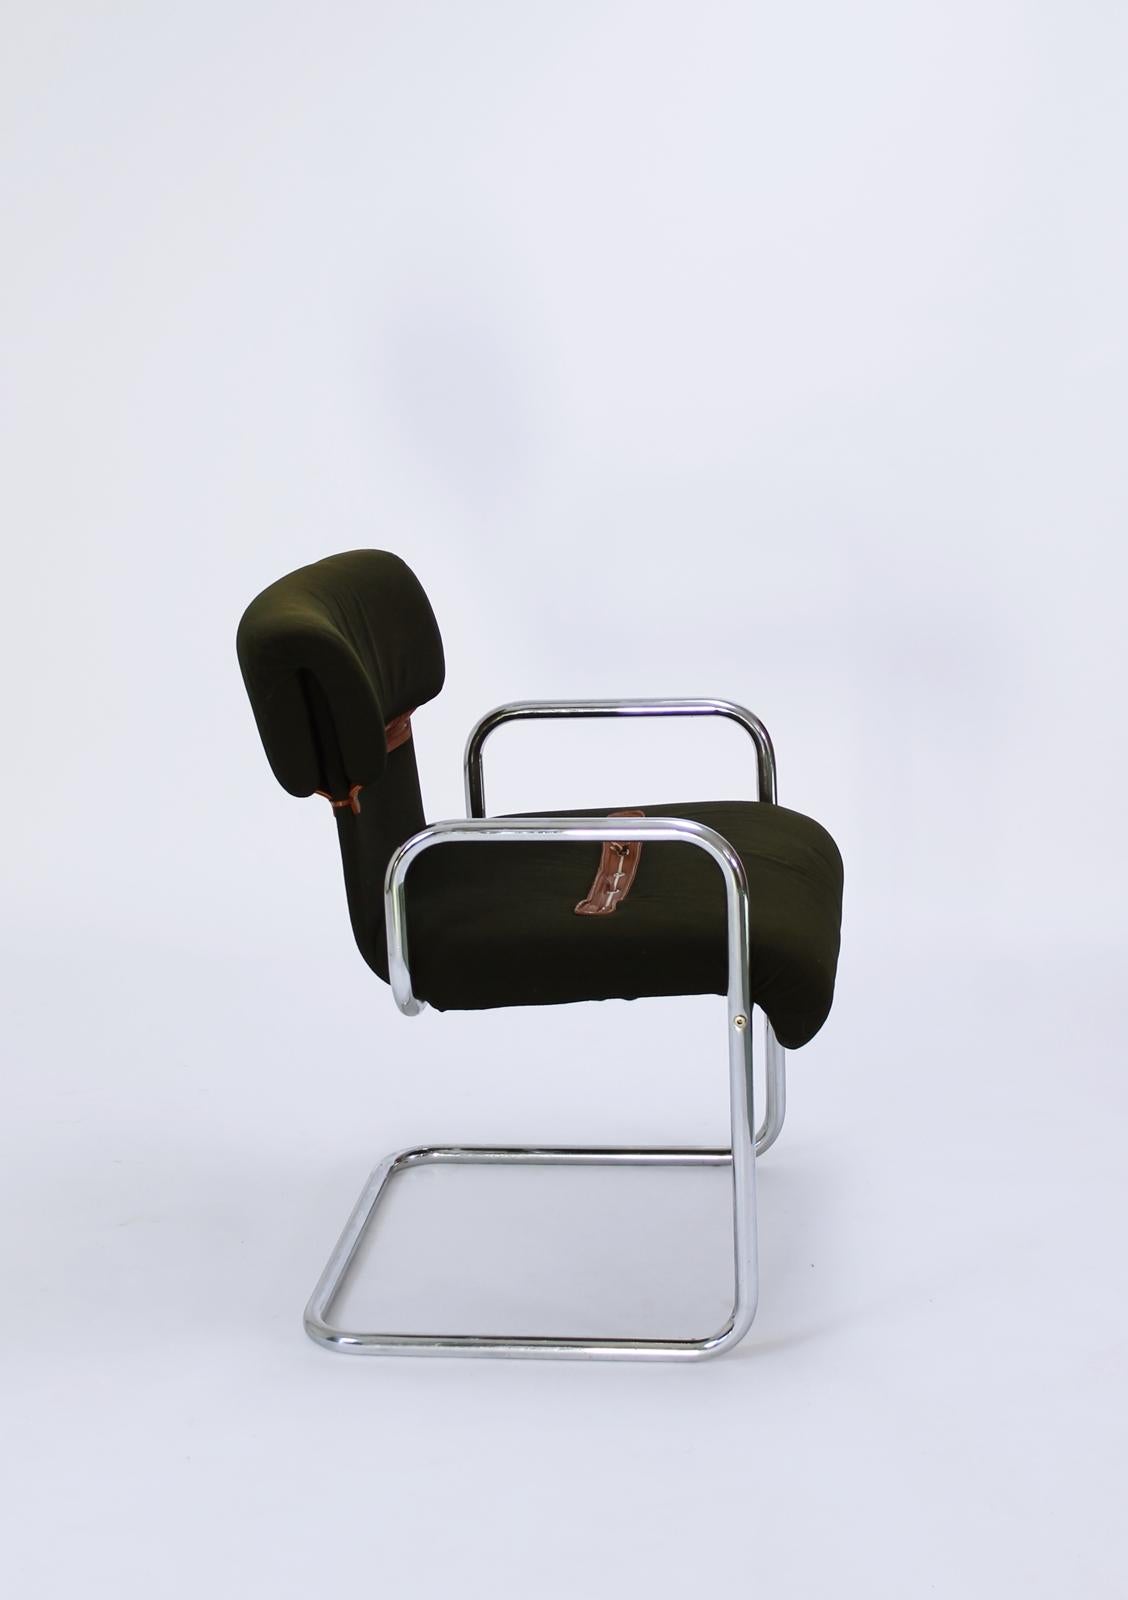 Stunning cantilever armchair on curved tubular steel legs features dark 
 green colored fabric upholstery with braided detailing on the backrests and seats.
Retailed by Hermes, circa 1970

As found condition: the seat has a very small hole.

.